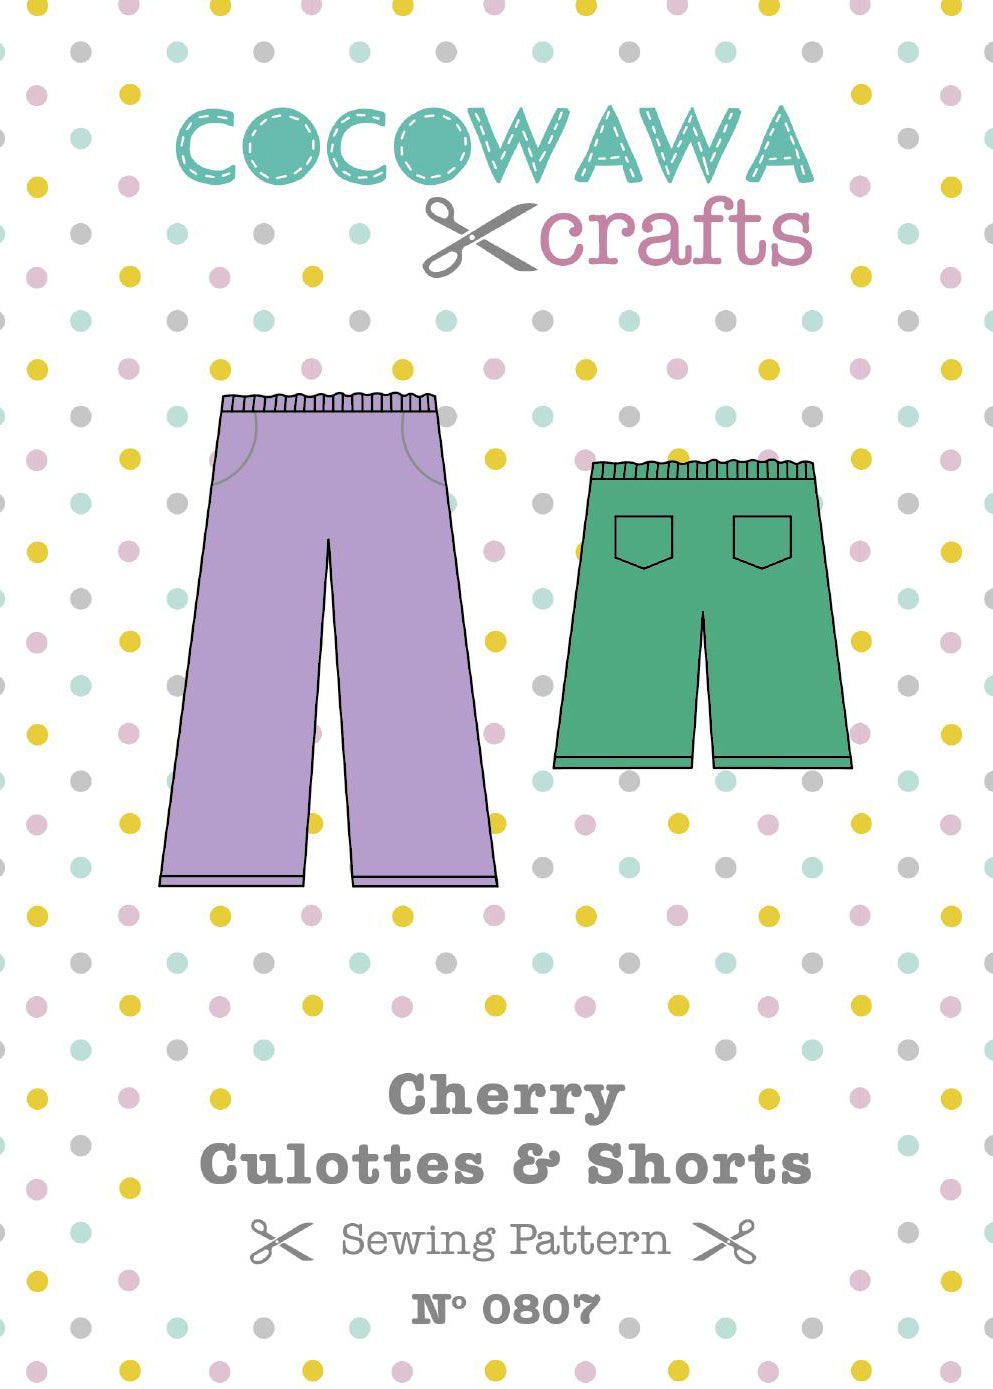 Cover Cherry Culottes and Shorts sewing pattern CocoWawa Crafts English